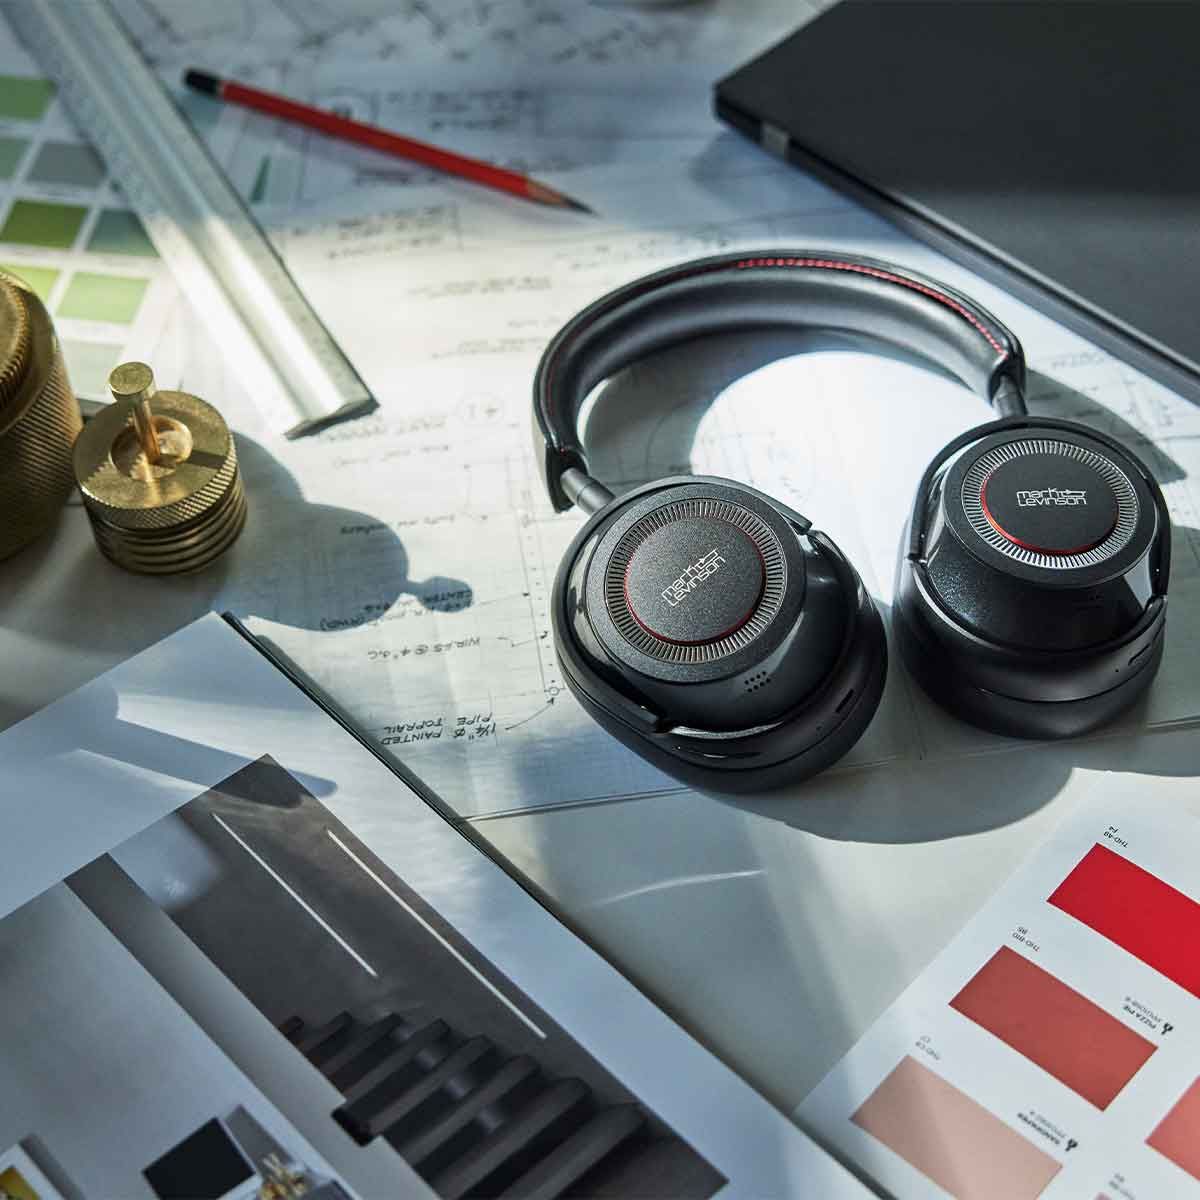 A pair of Mark Levinson № 5909 Premium Hi-Res Wireless ANC Over-Ear headphones laying on a work desk with papers and rulers spread out on the table.